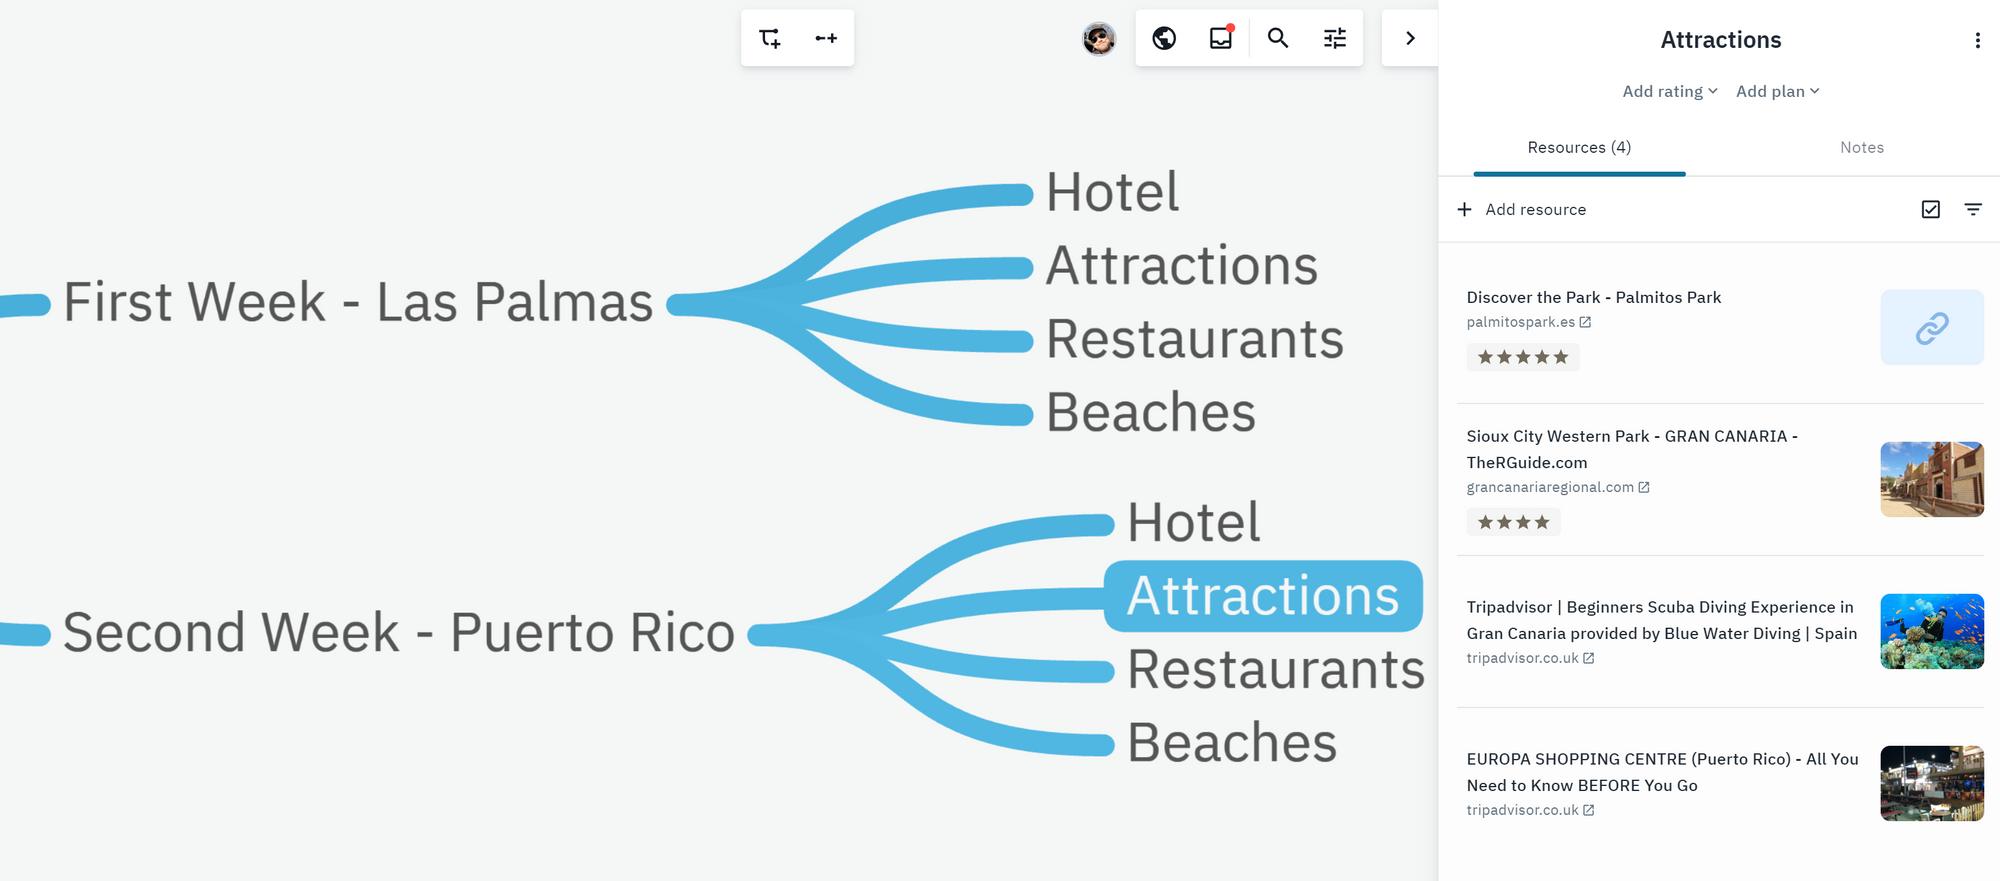 How to plan your vacation using a mind-map